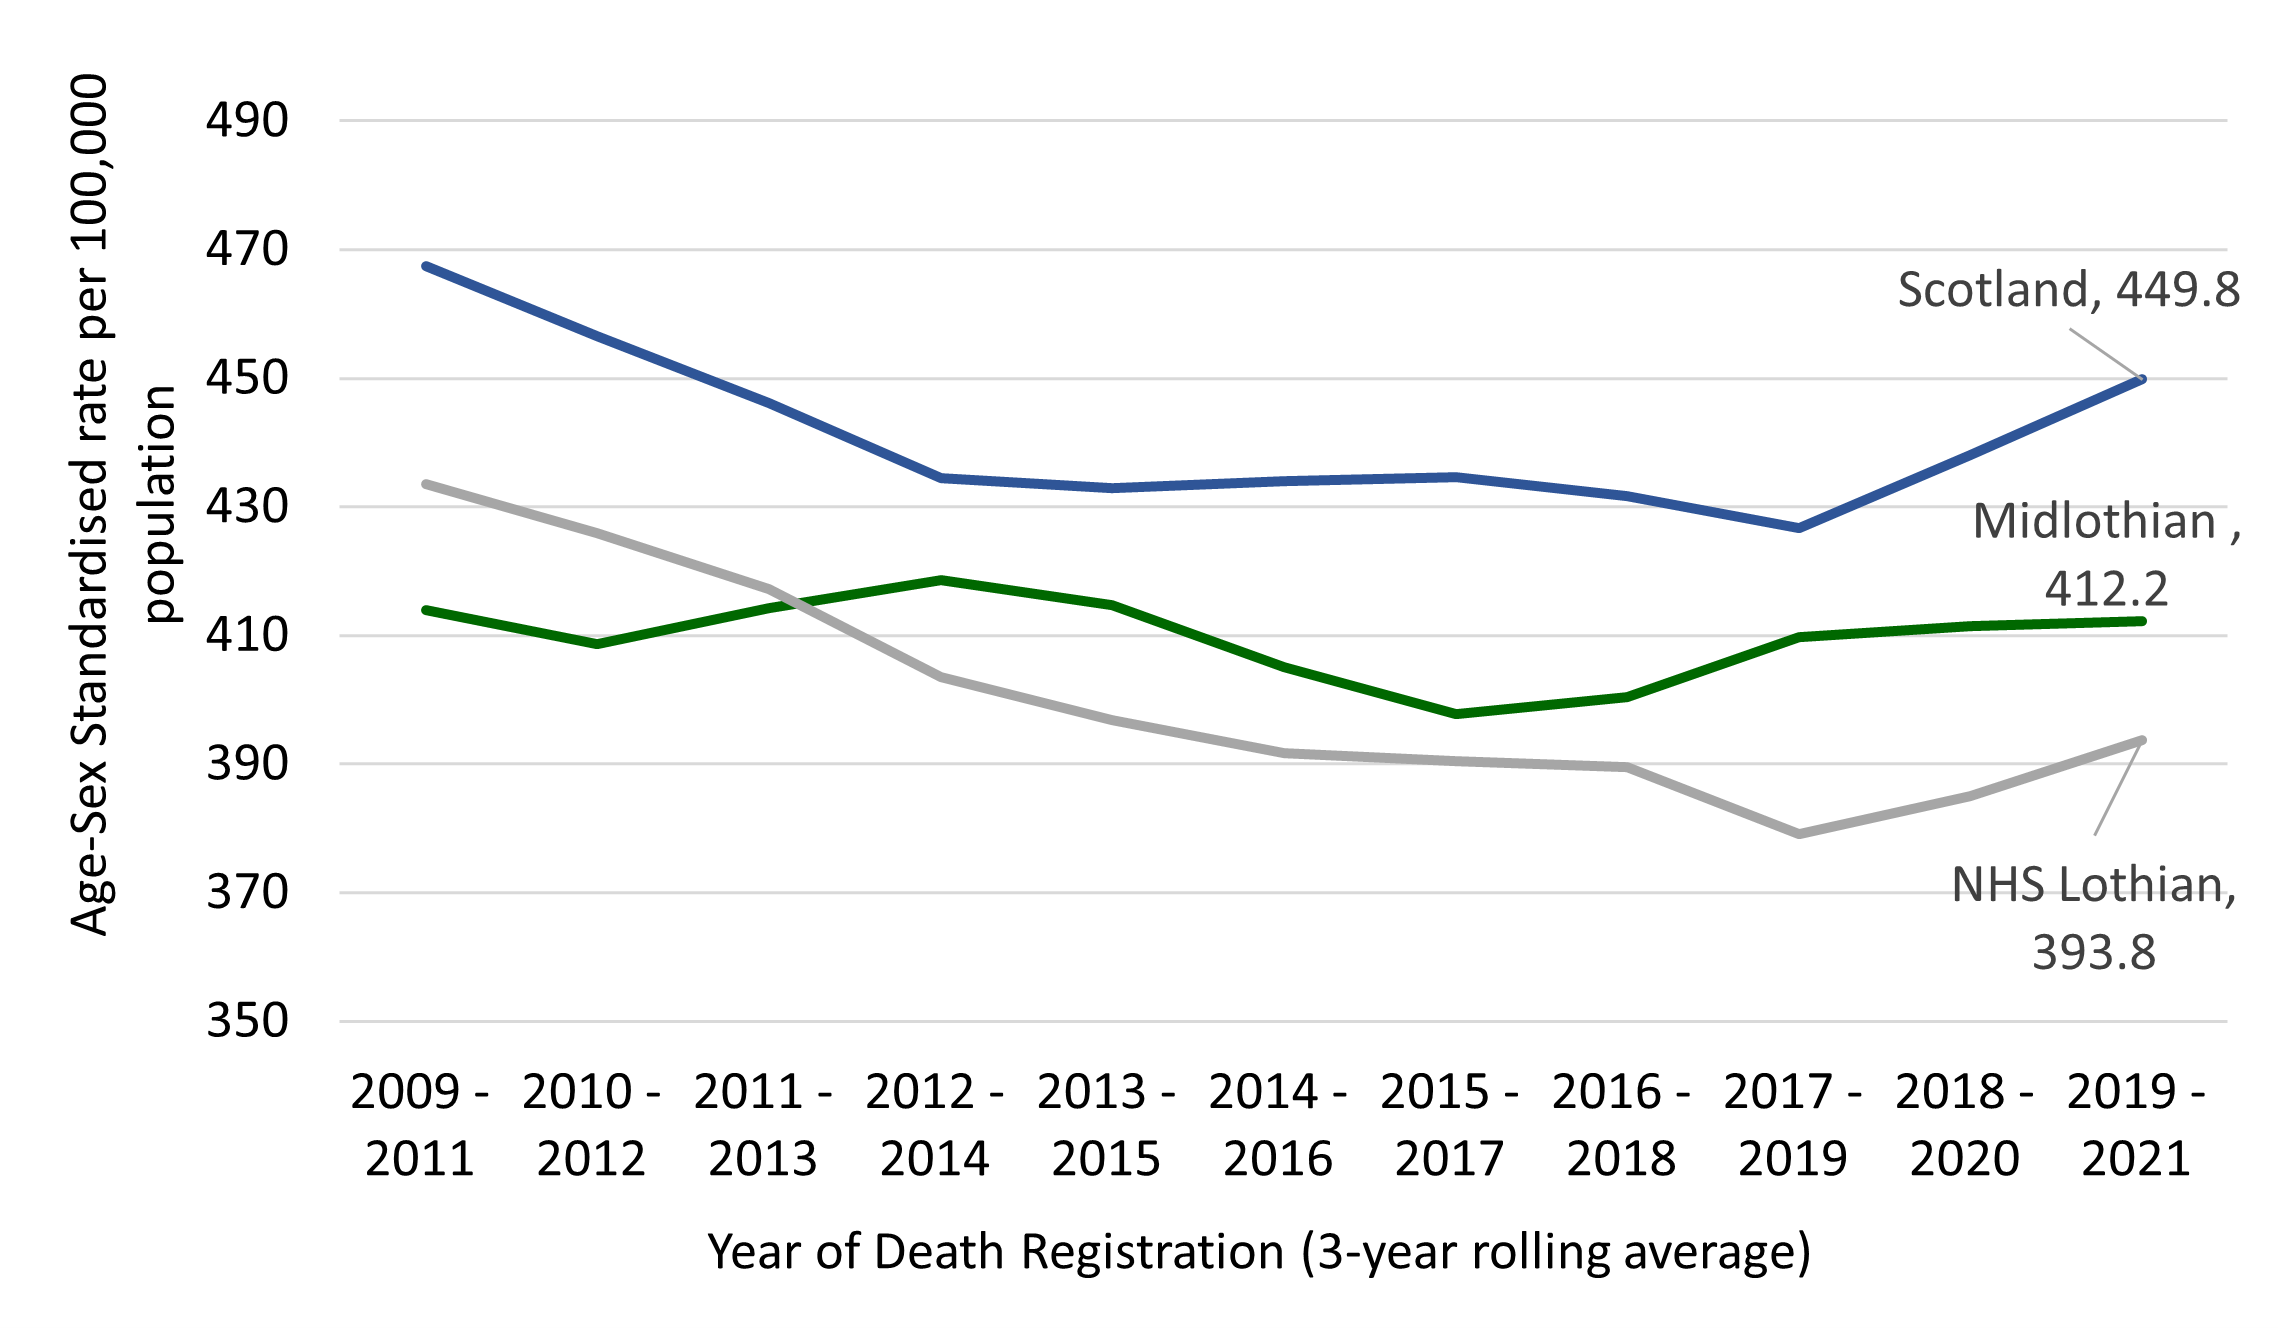 Early (under 75) all-cause mortality rates in Scotland and Lothian were in steady decline from 2009-11 to 2017-19, when they began to rise again and have continued to do so until 2020-22.  In contrast, rates in Midlothian remained fairly constant.  Midlothian had an average of 410.5 early mortalities per 100,000 in the 2020-22 period which was similar to Lothian but lower than Scotland which had an average of 455.1 per 100,000 in the same period.